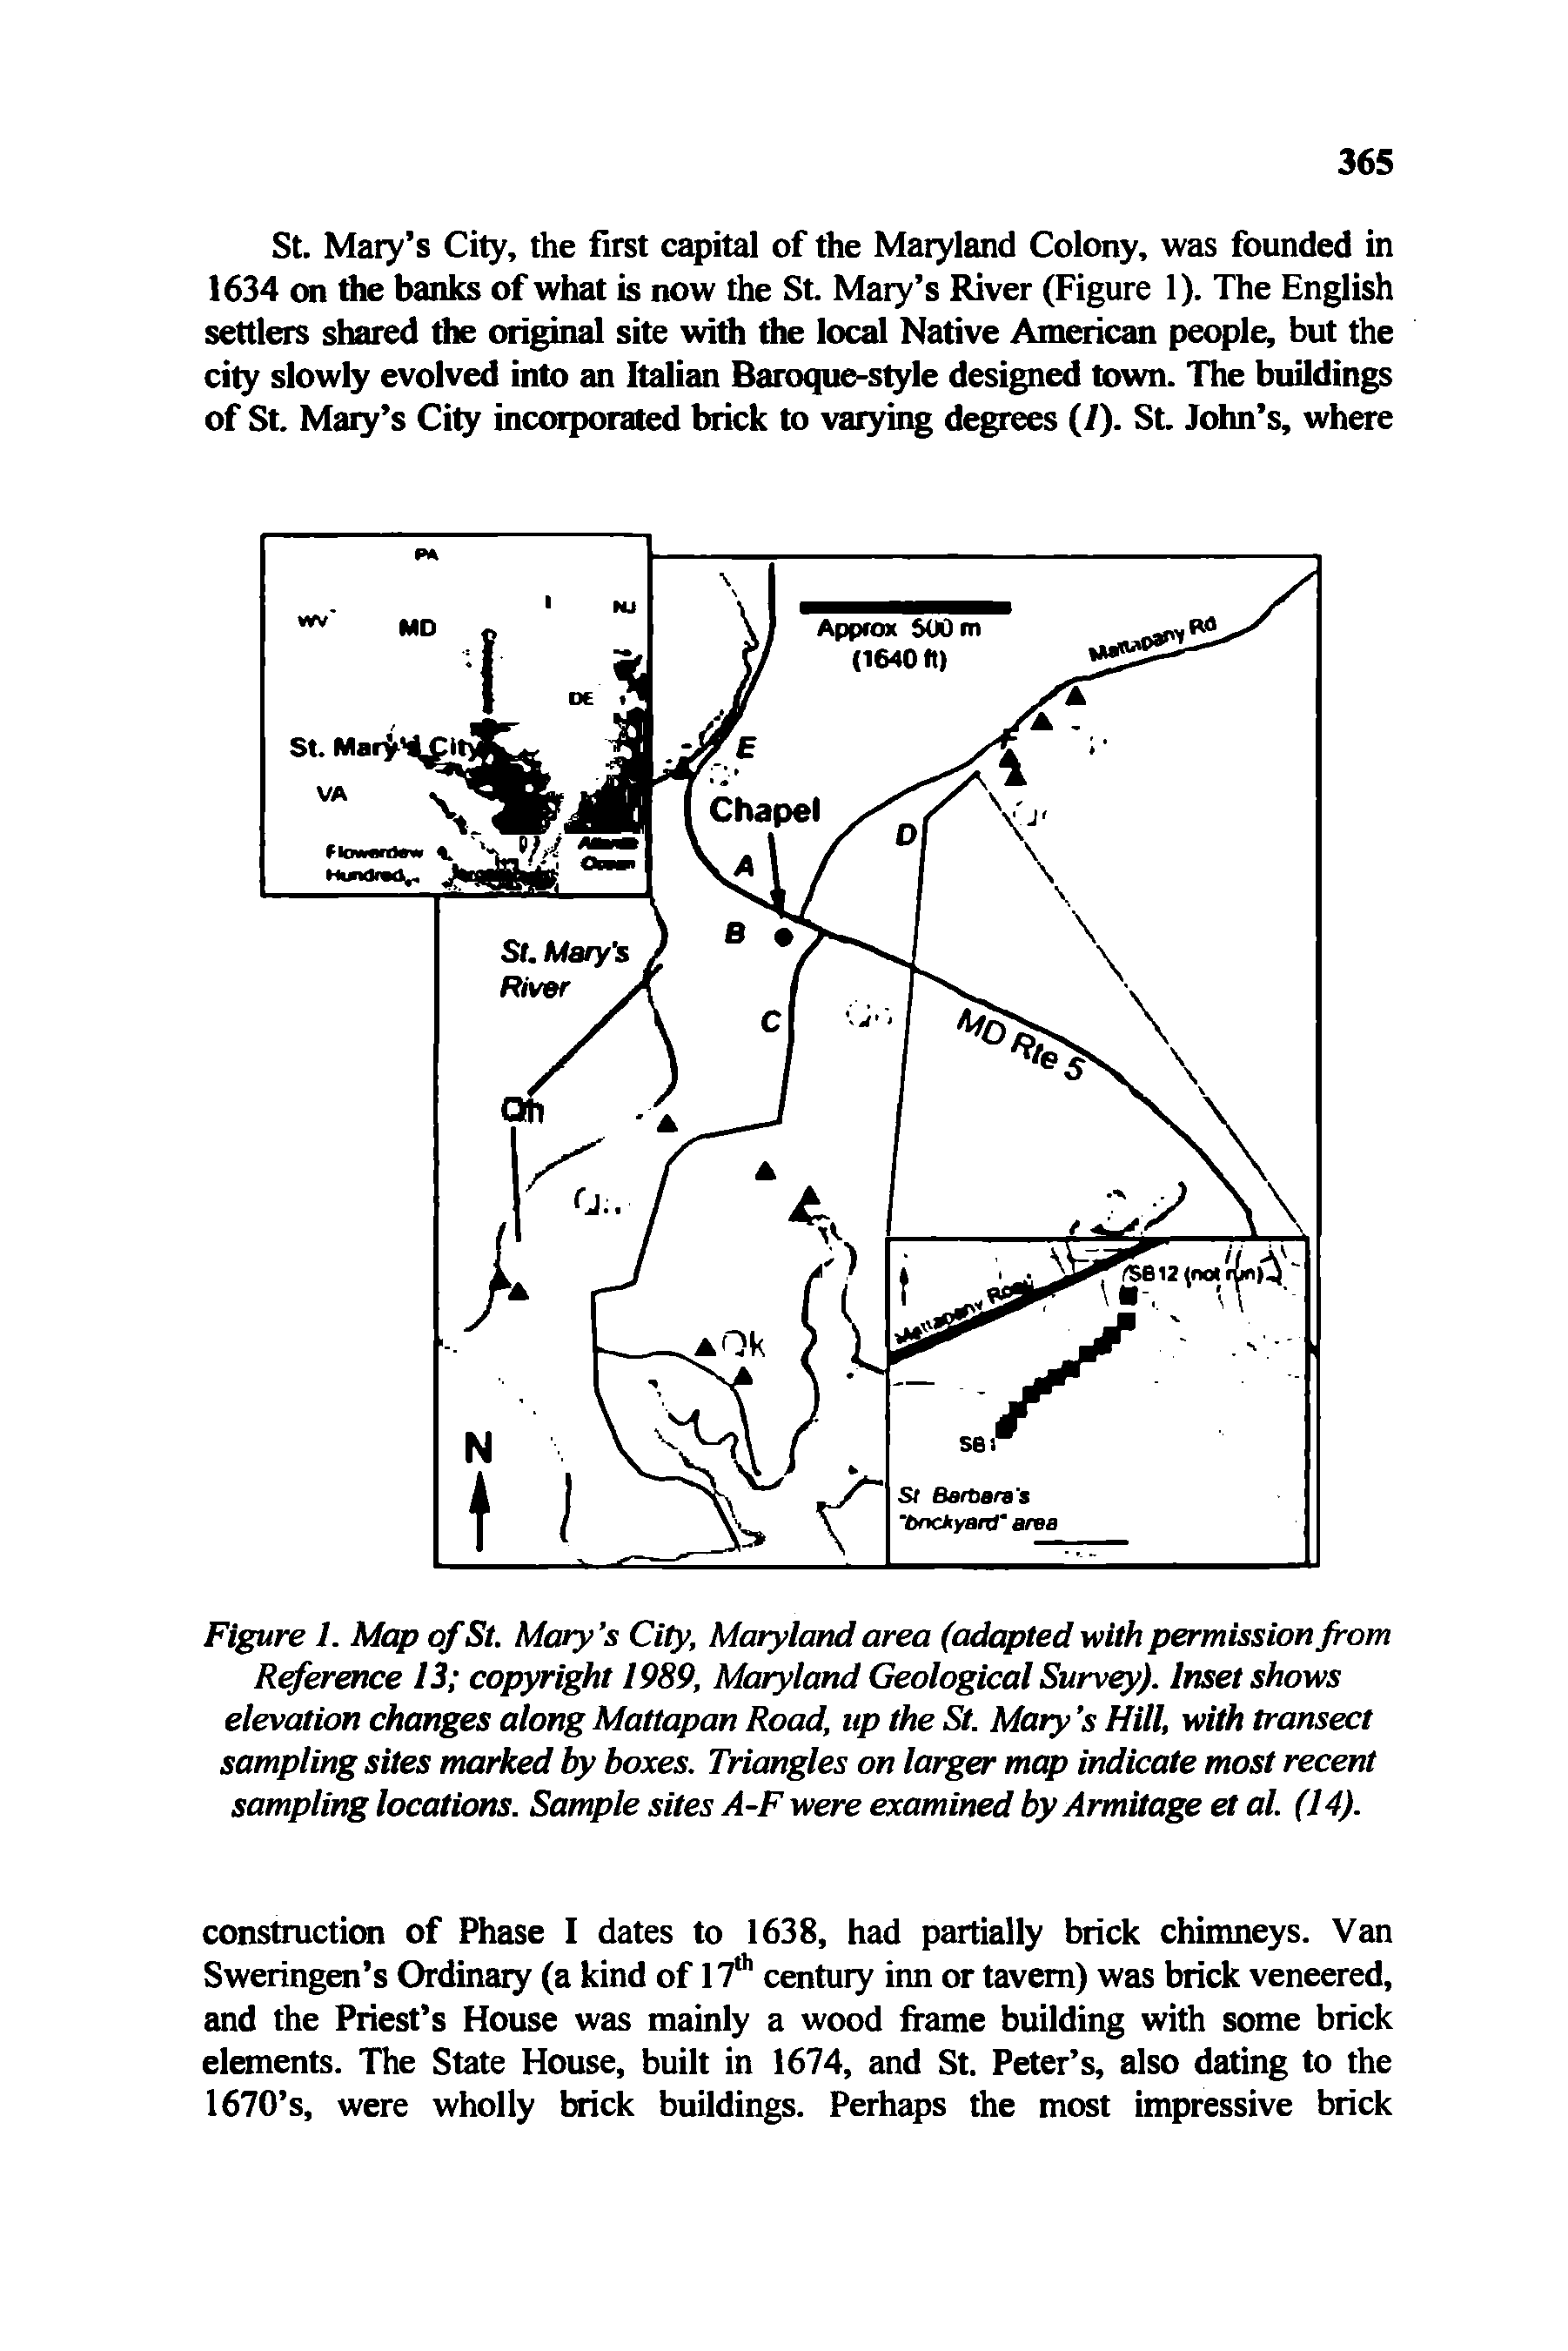 Figure 1. Map of St. Mary s City, Maryland area (adapted with permission from Reference 13 copyright 1989, Maryland Geological Survey). Inset shows elevation changes along Mattapan Road, up the St. Mary s Hill, with transect sampling sites marked by boxes. Triangles on larger map indicate most recent sampling locations. Sample sites A-F were examined by Armitage et al. (14).